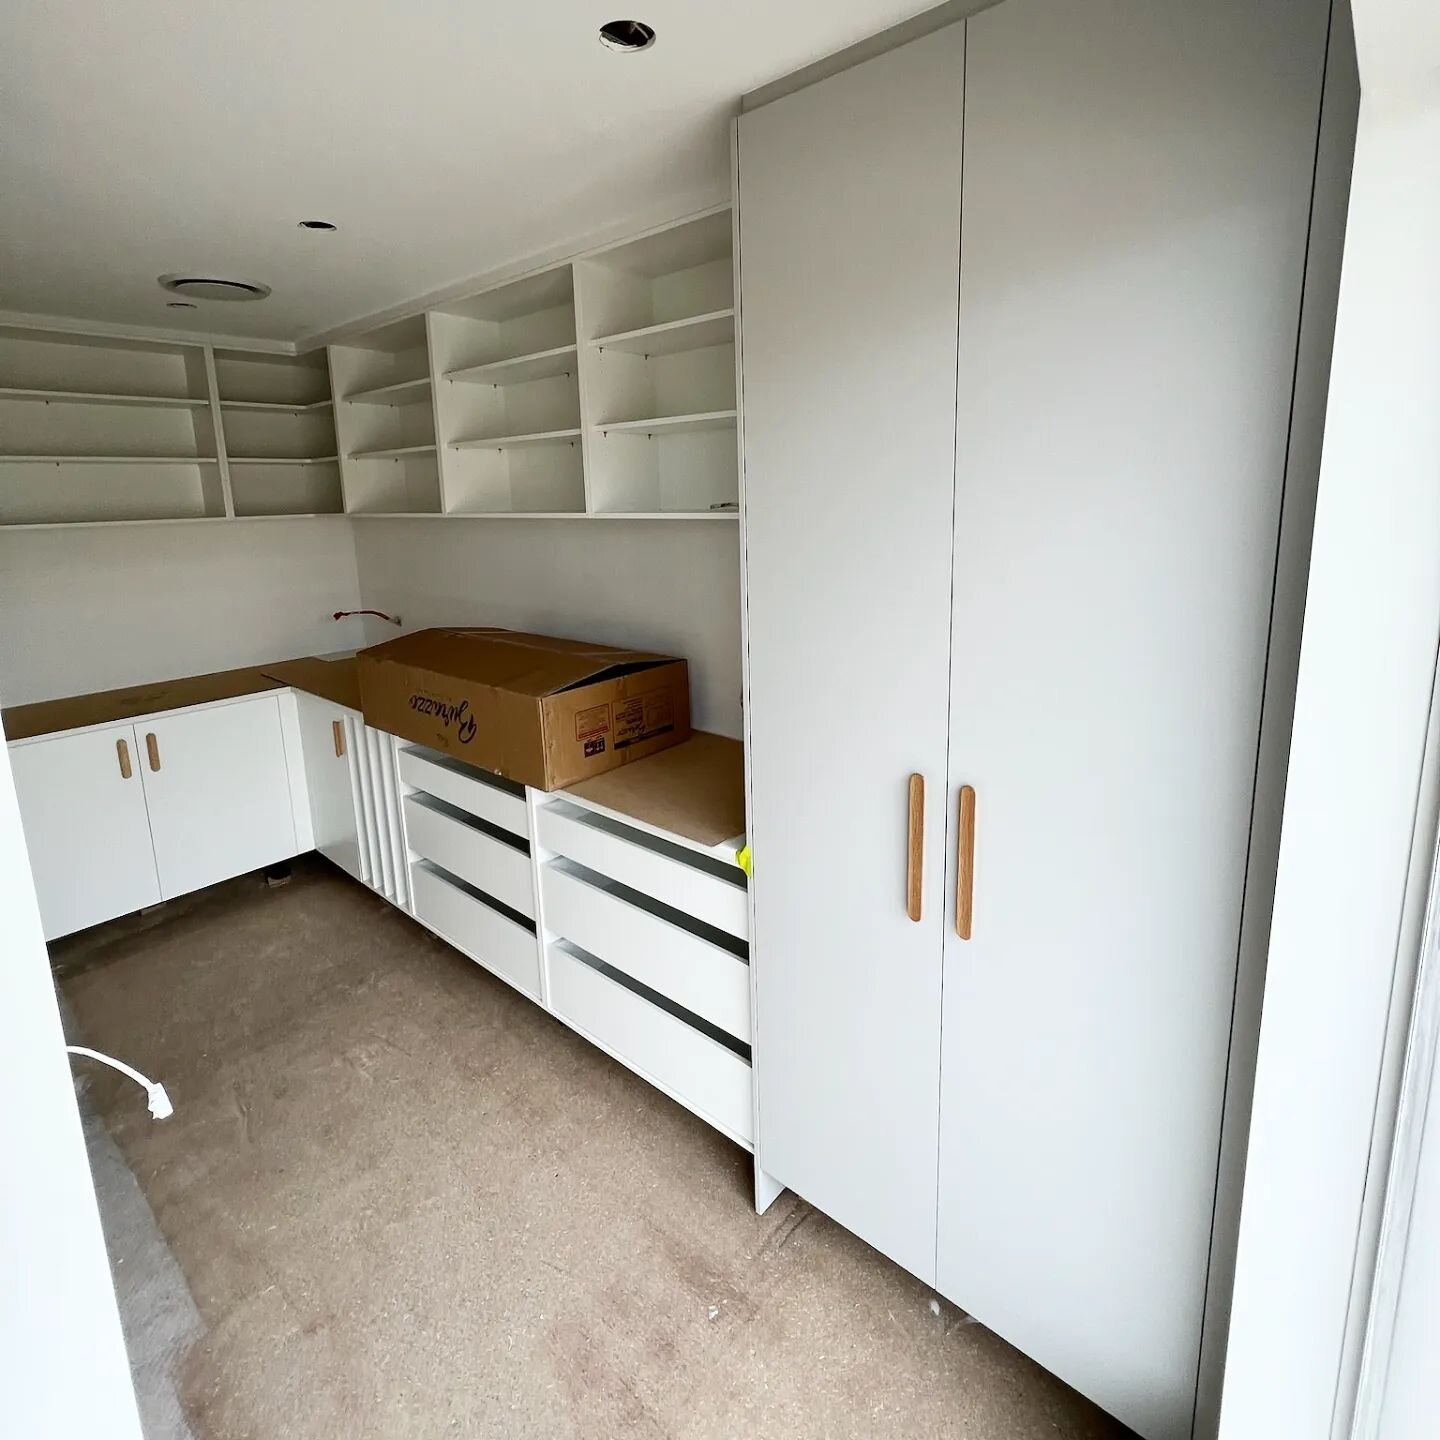 It's Friday! Construction update time. Our Tranmere renovation fit out is well underway and we thought we'd give you a sneak peak. The Butler's pantry of our dreams! Next up is the flooring install and the front facade is currently being reinvented! 